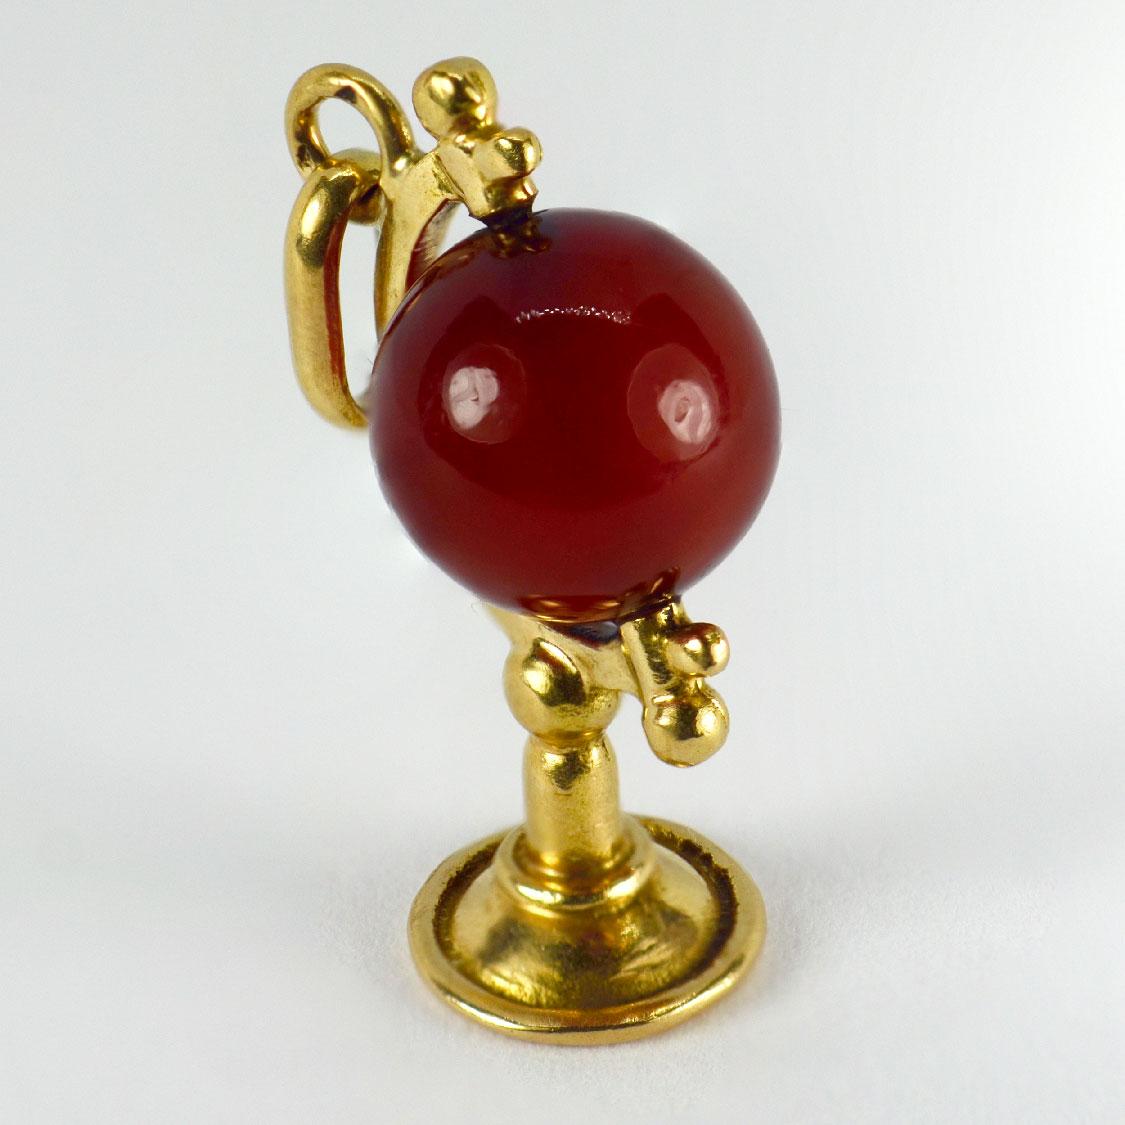 A French 18 karat (18K) yellow gold charm pendant designed as a spinning carnelian globe on a stand. Stamped with the eagles head for French manufacture and 18 karat gold with an unknown maker’s mark.

Dimensions: 2.2 x 1.5 x 0.9 cm (not including